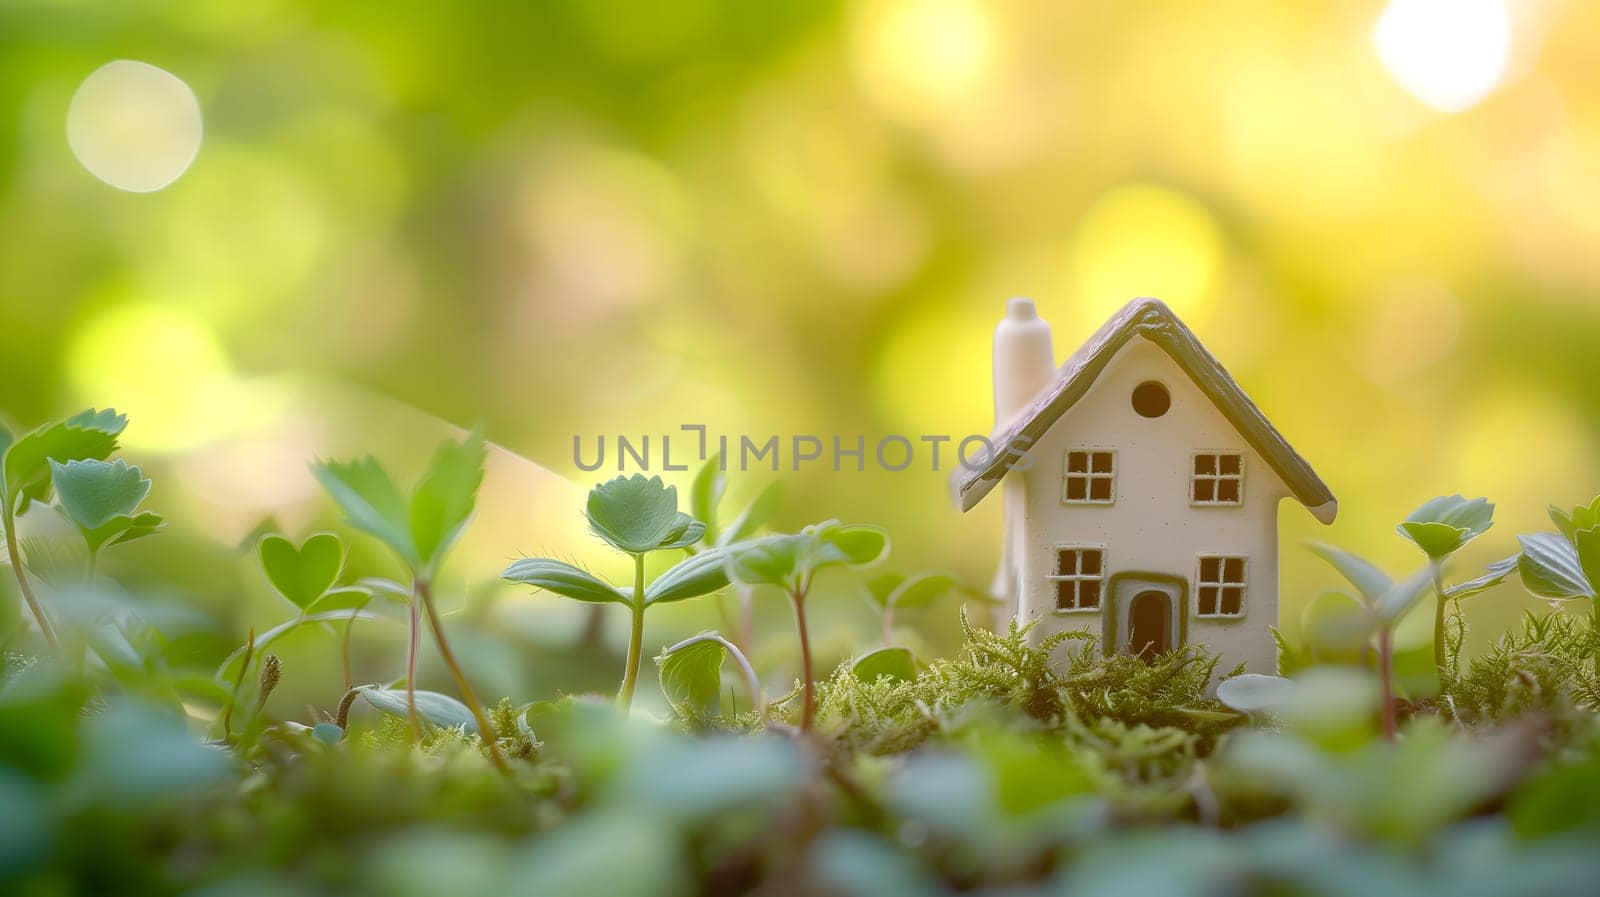 Spring background with a tiny toy house symbolizing family mortgage construction rental and property concepts. Neural network generated image. Not based on any actual person or scene.